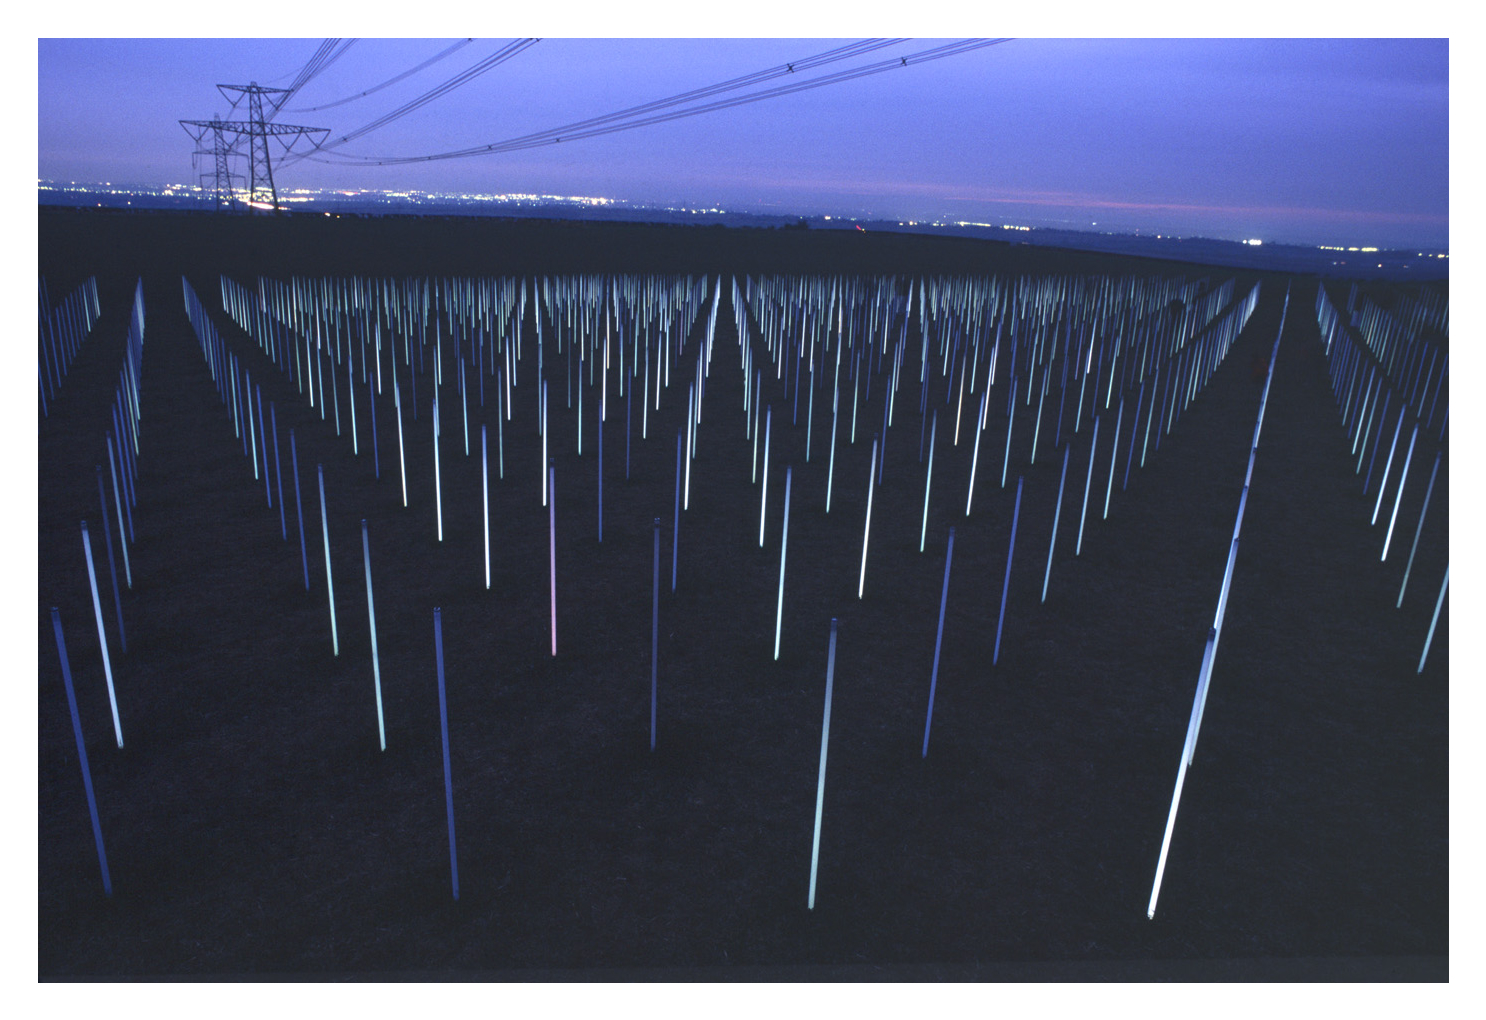 Photo of 'The field' by Richard Box showing many lights under a powerline